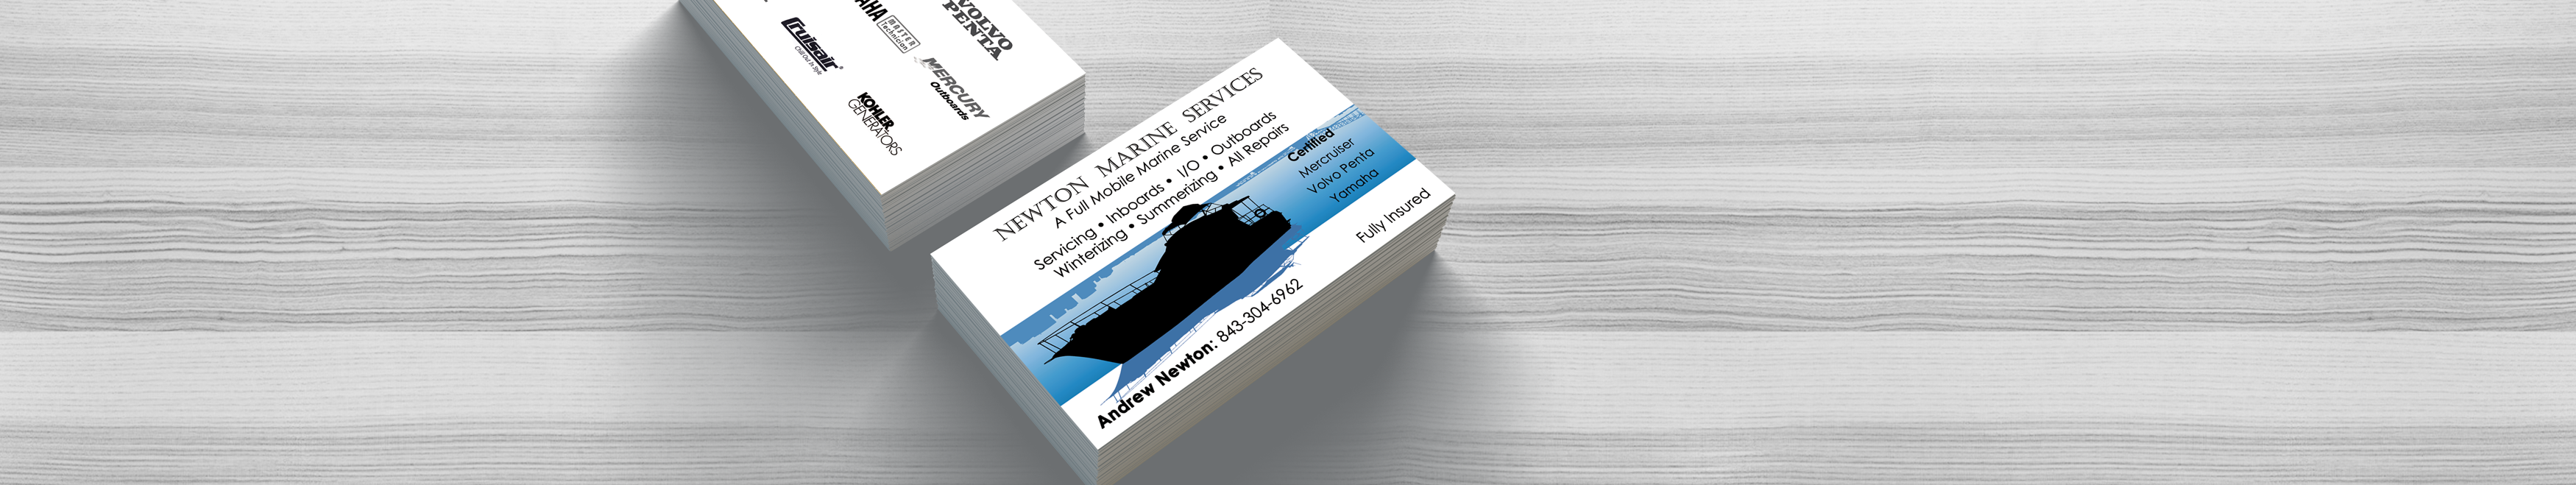 double sided business cards - designed and delivered by Insite Media Design